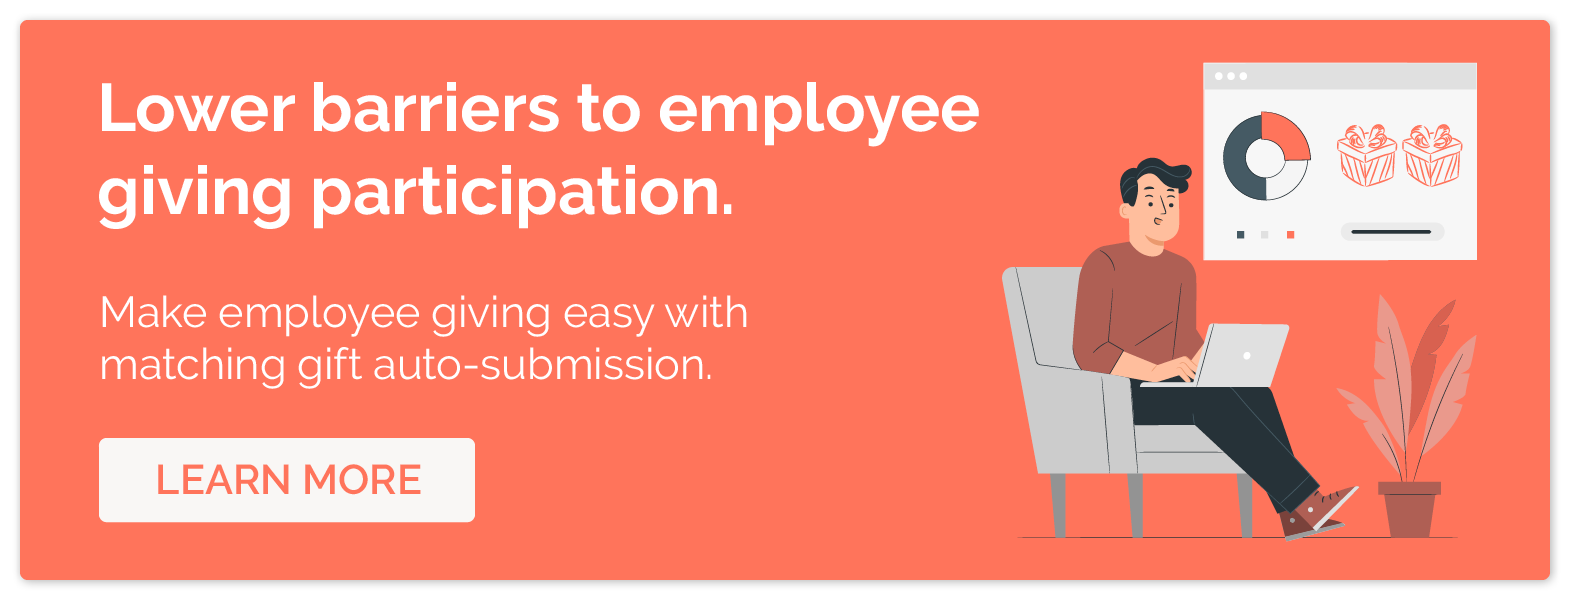 Click to learn more about matching gift auto-submission and how it helps your employee giving campaigns.